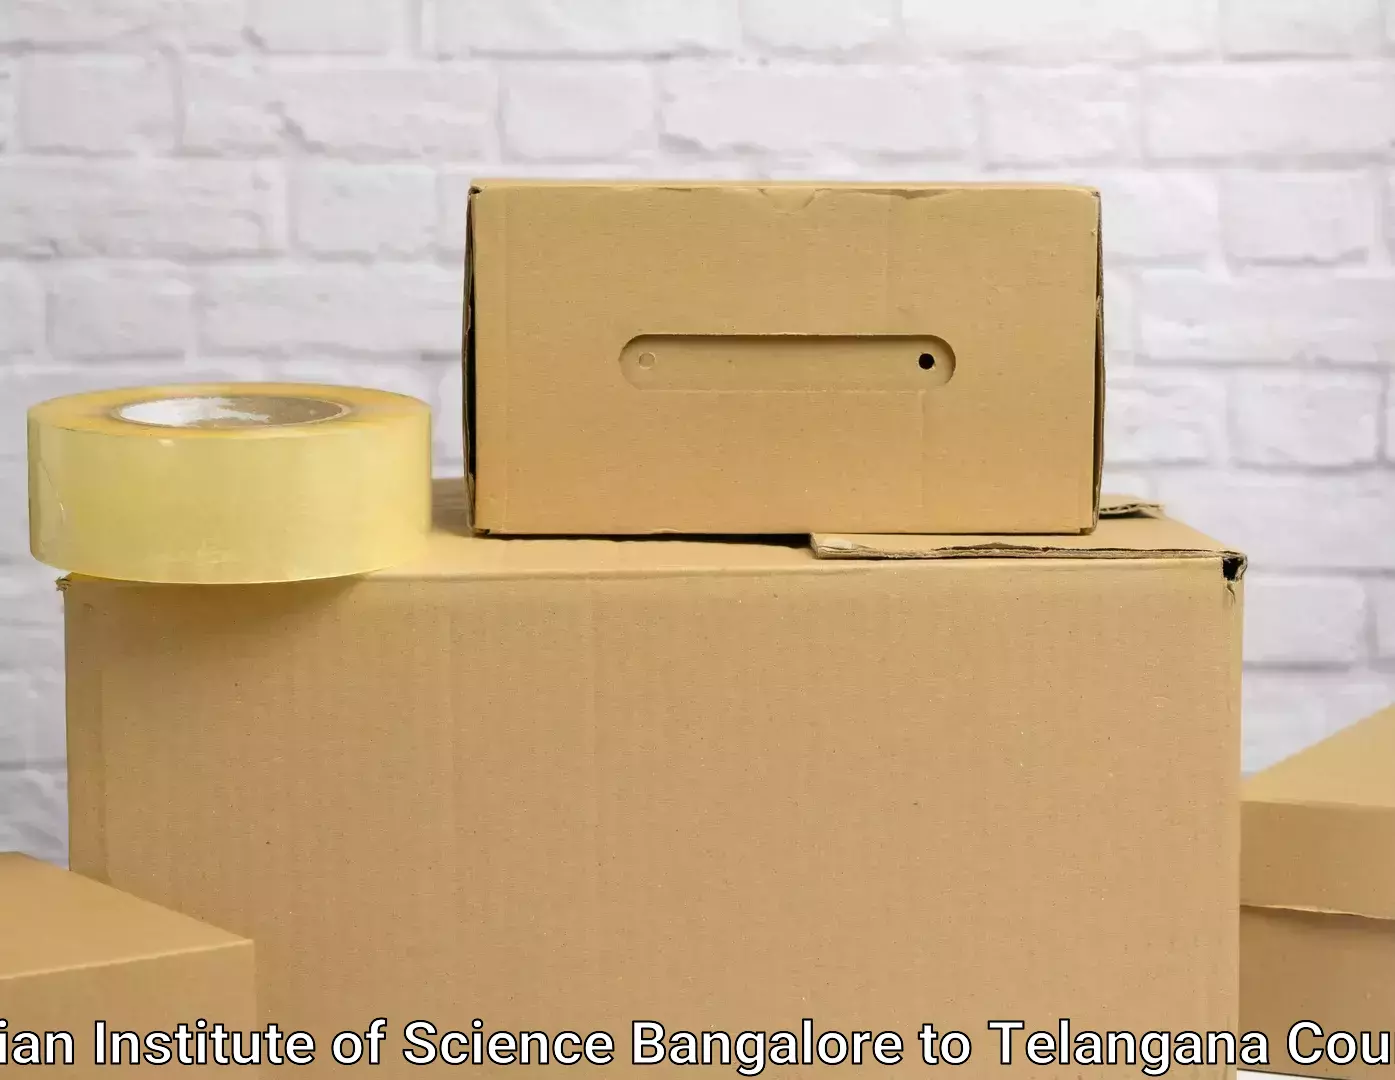 Furniture moving services in Indian Institute of Science Bangalore to Cheyyur